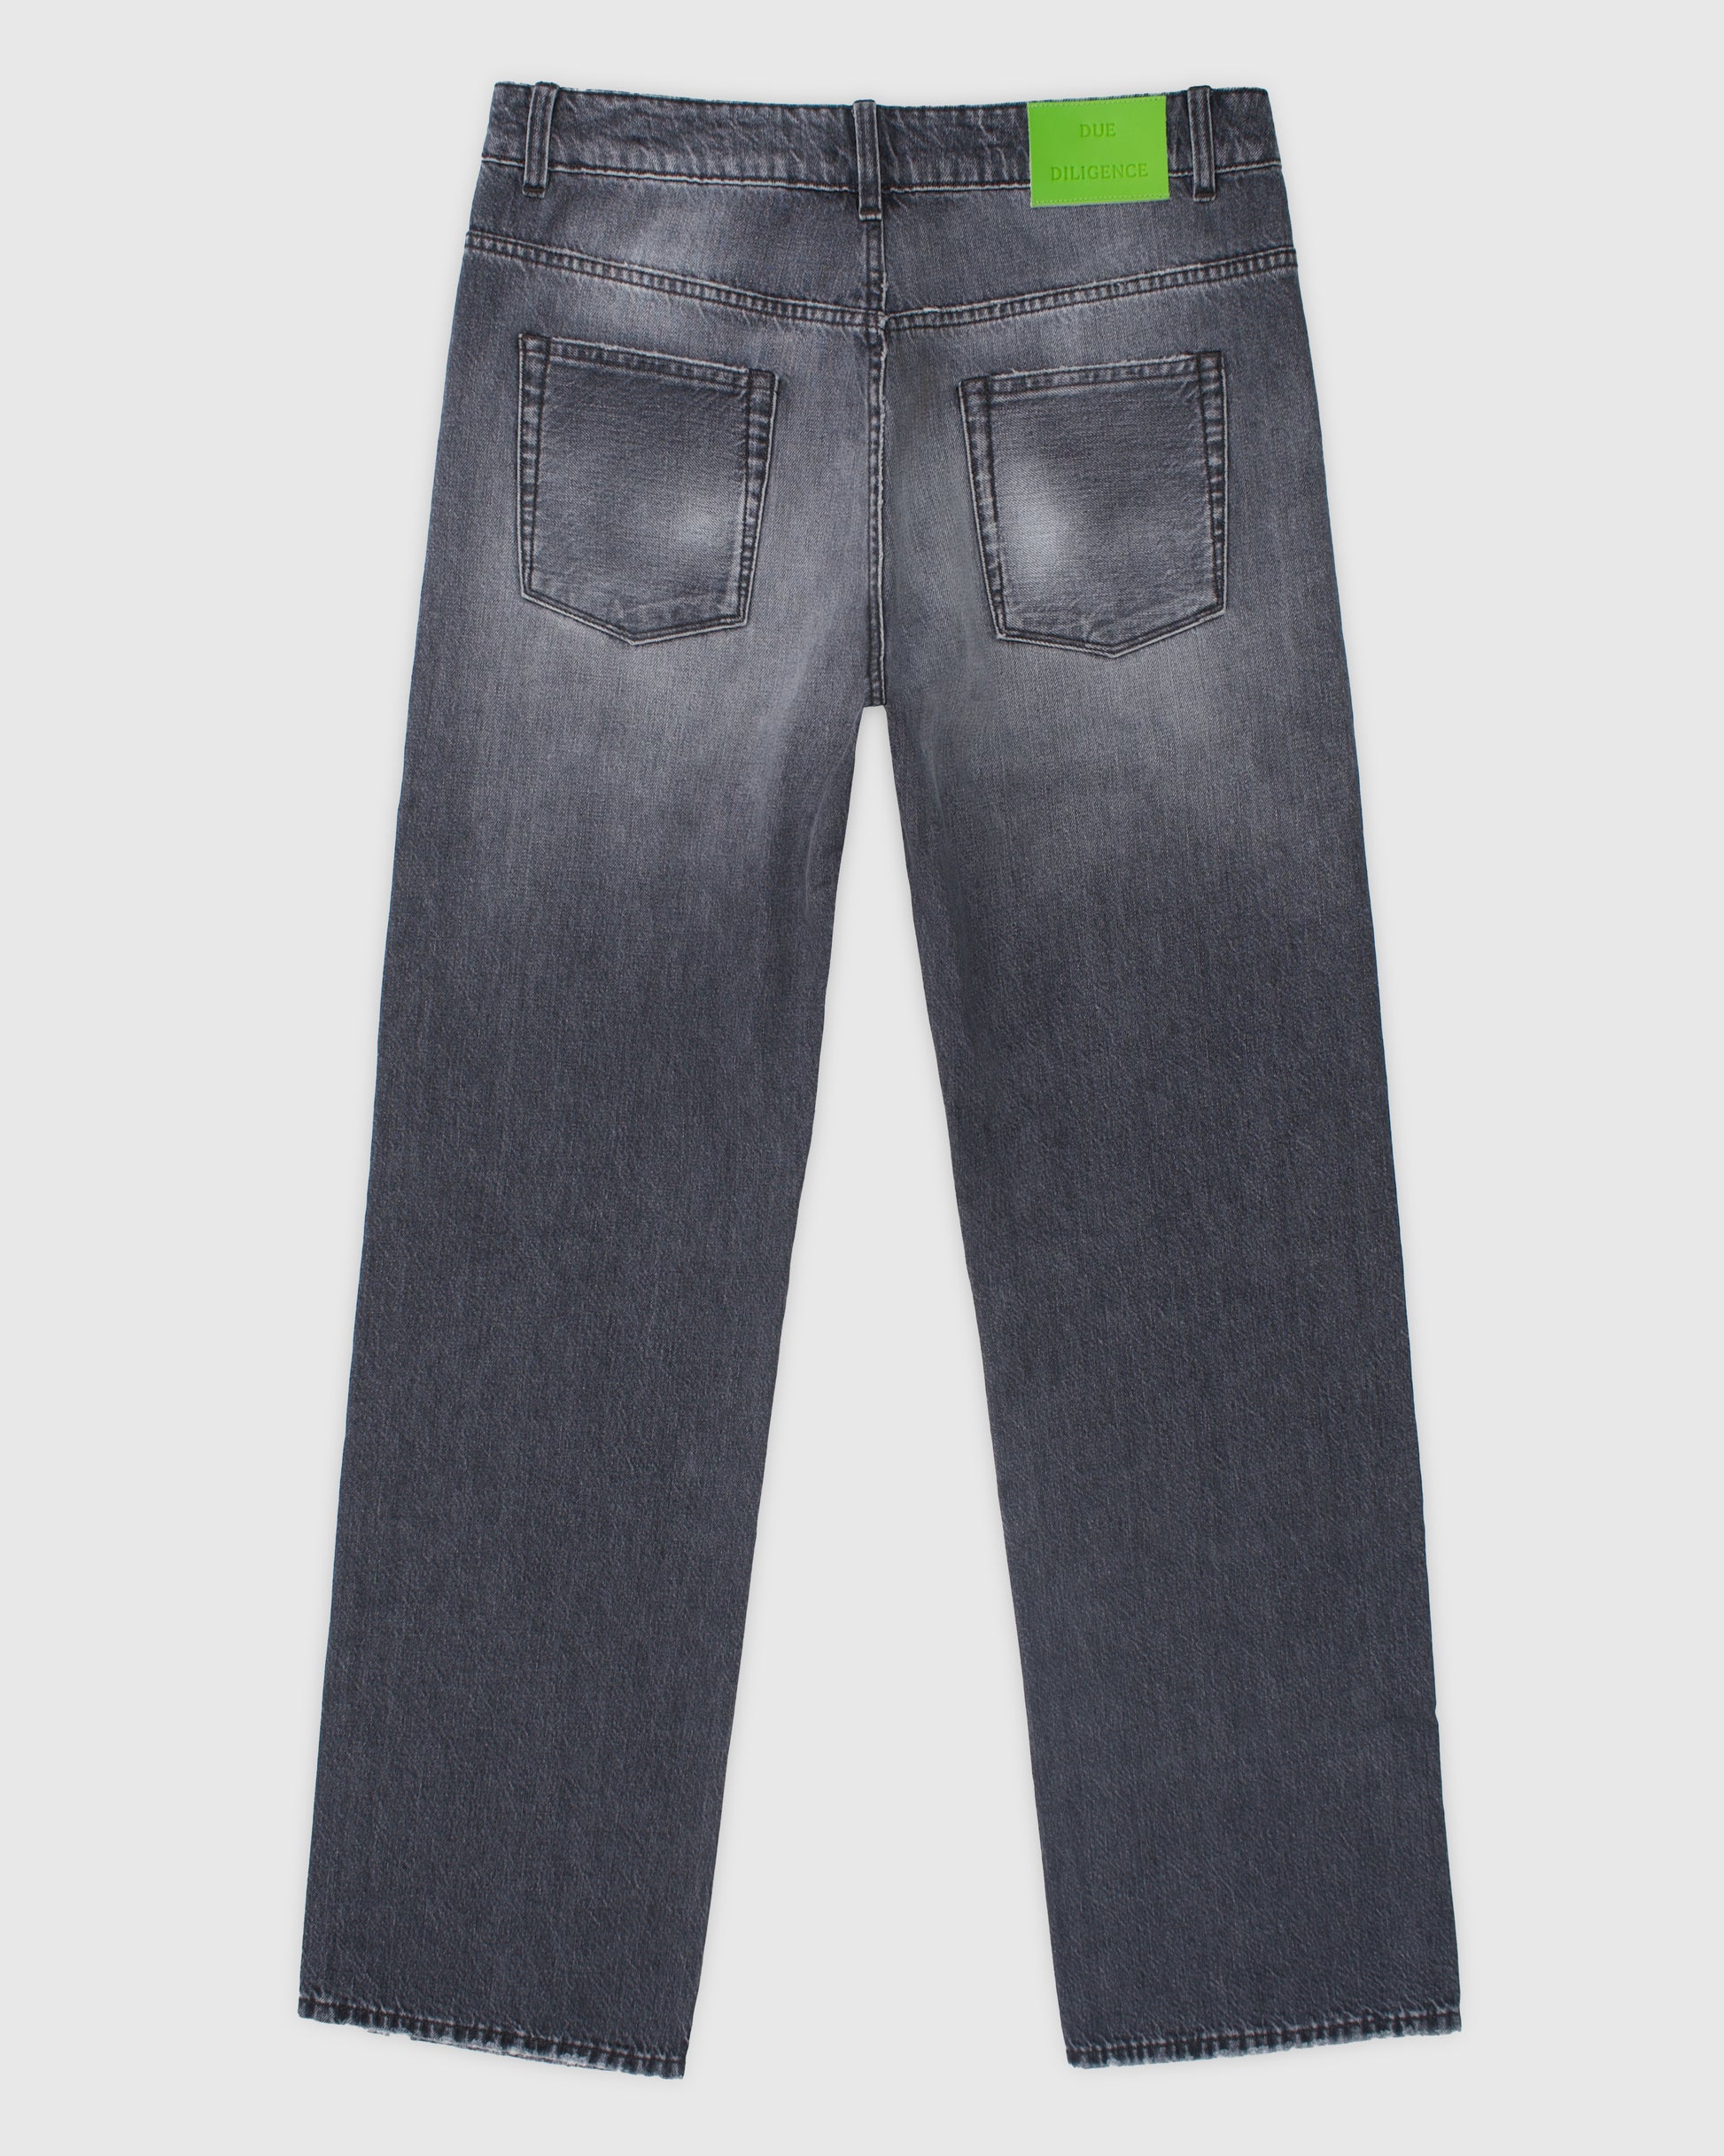 Grey Distressed Washed Jean - Due Diligence Apparel